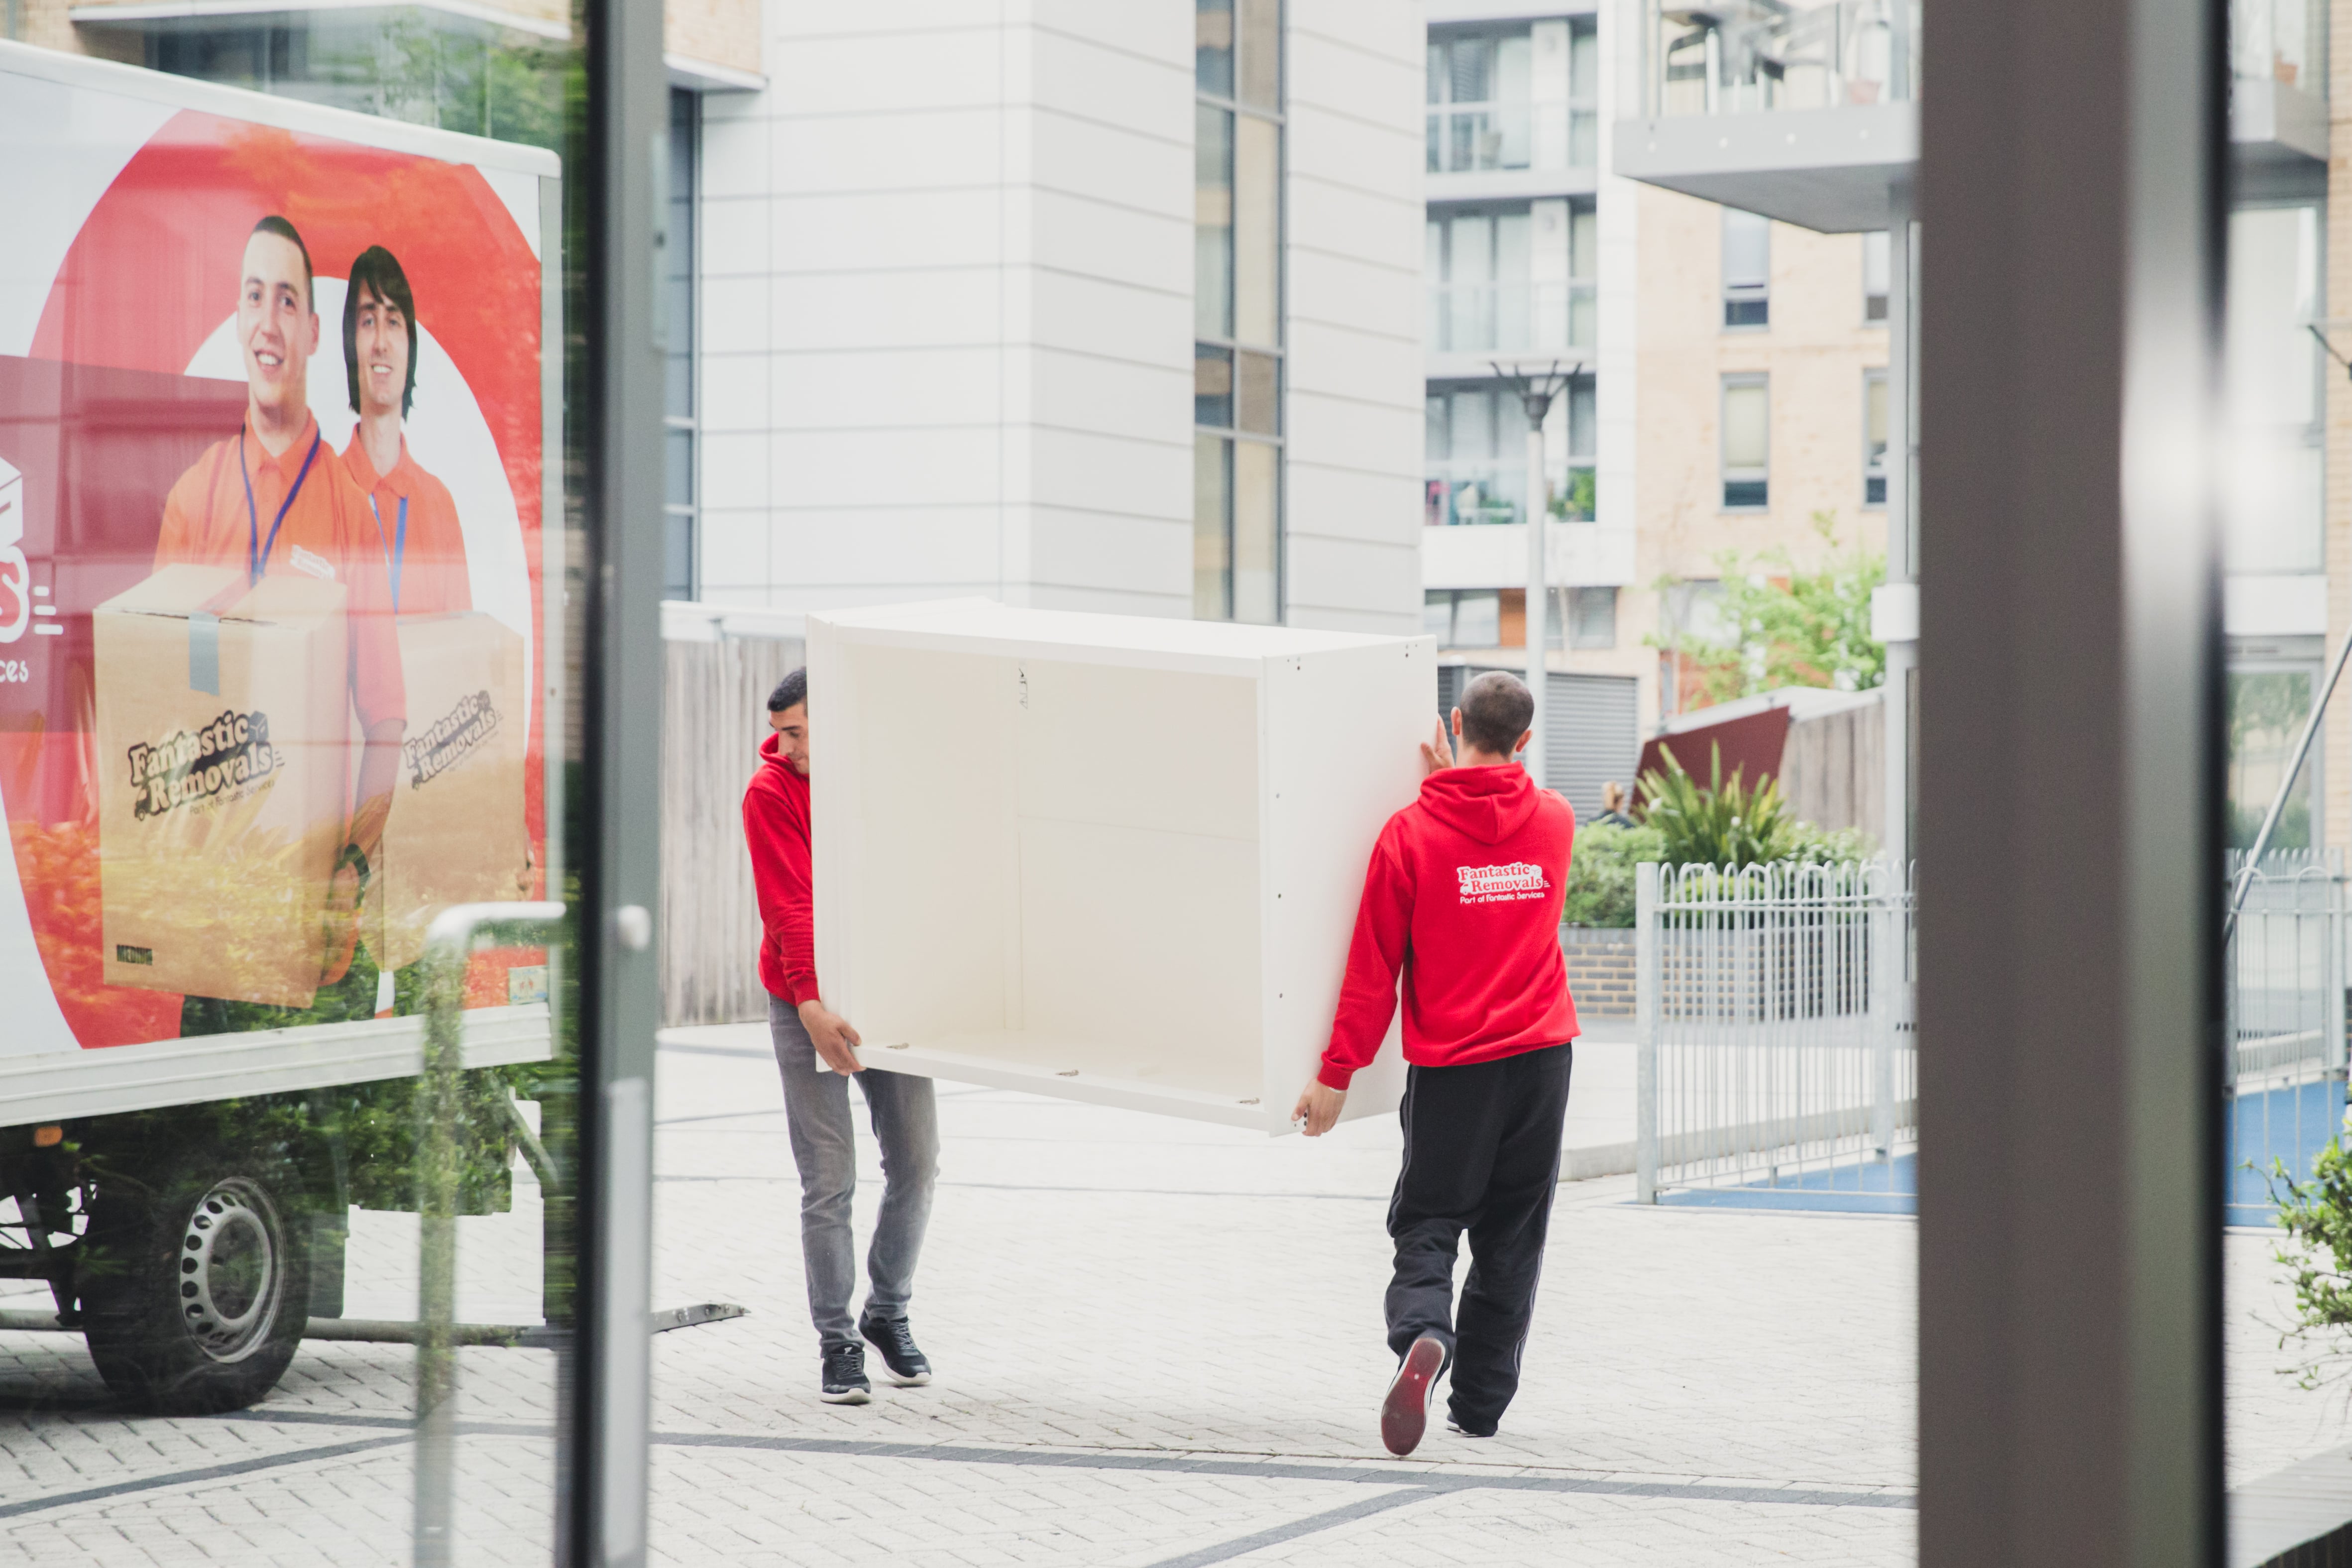 removalists from Fantastic Removals